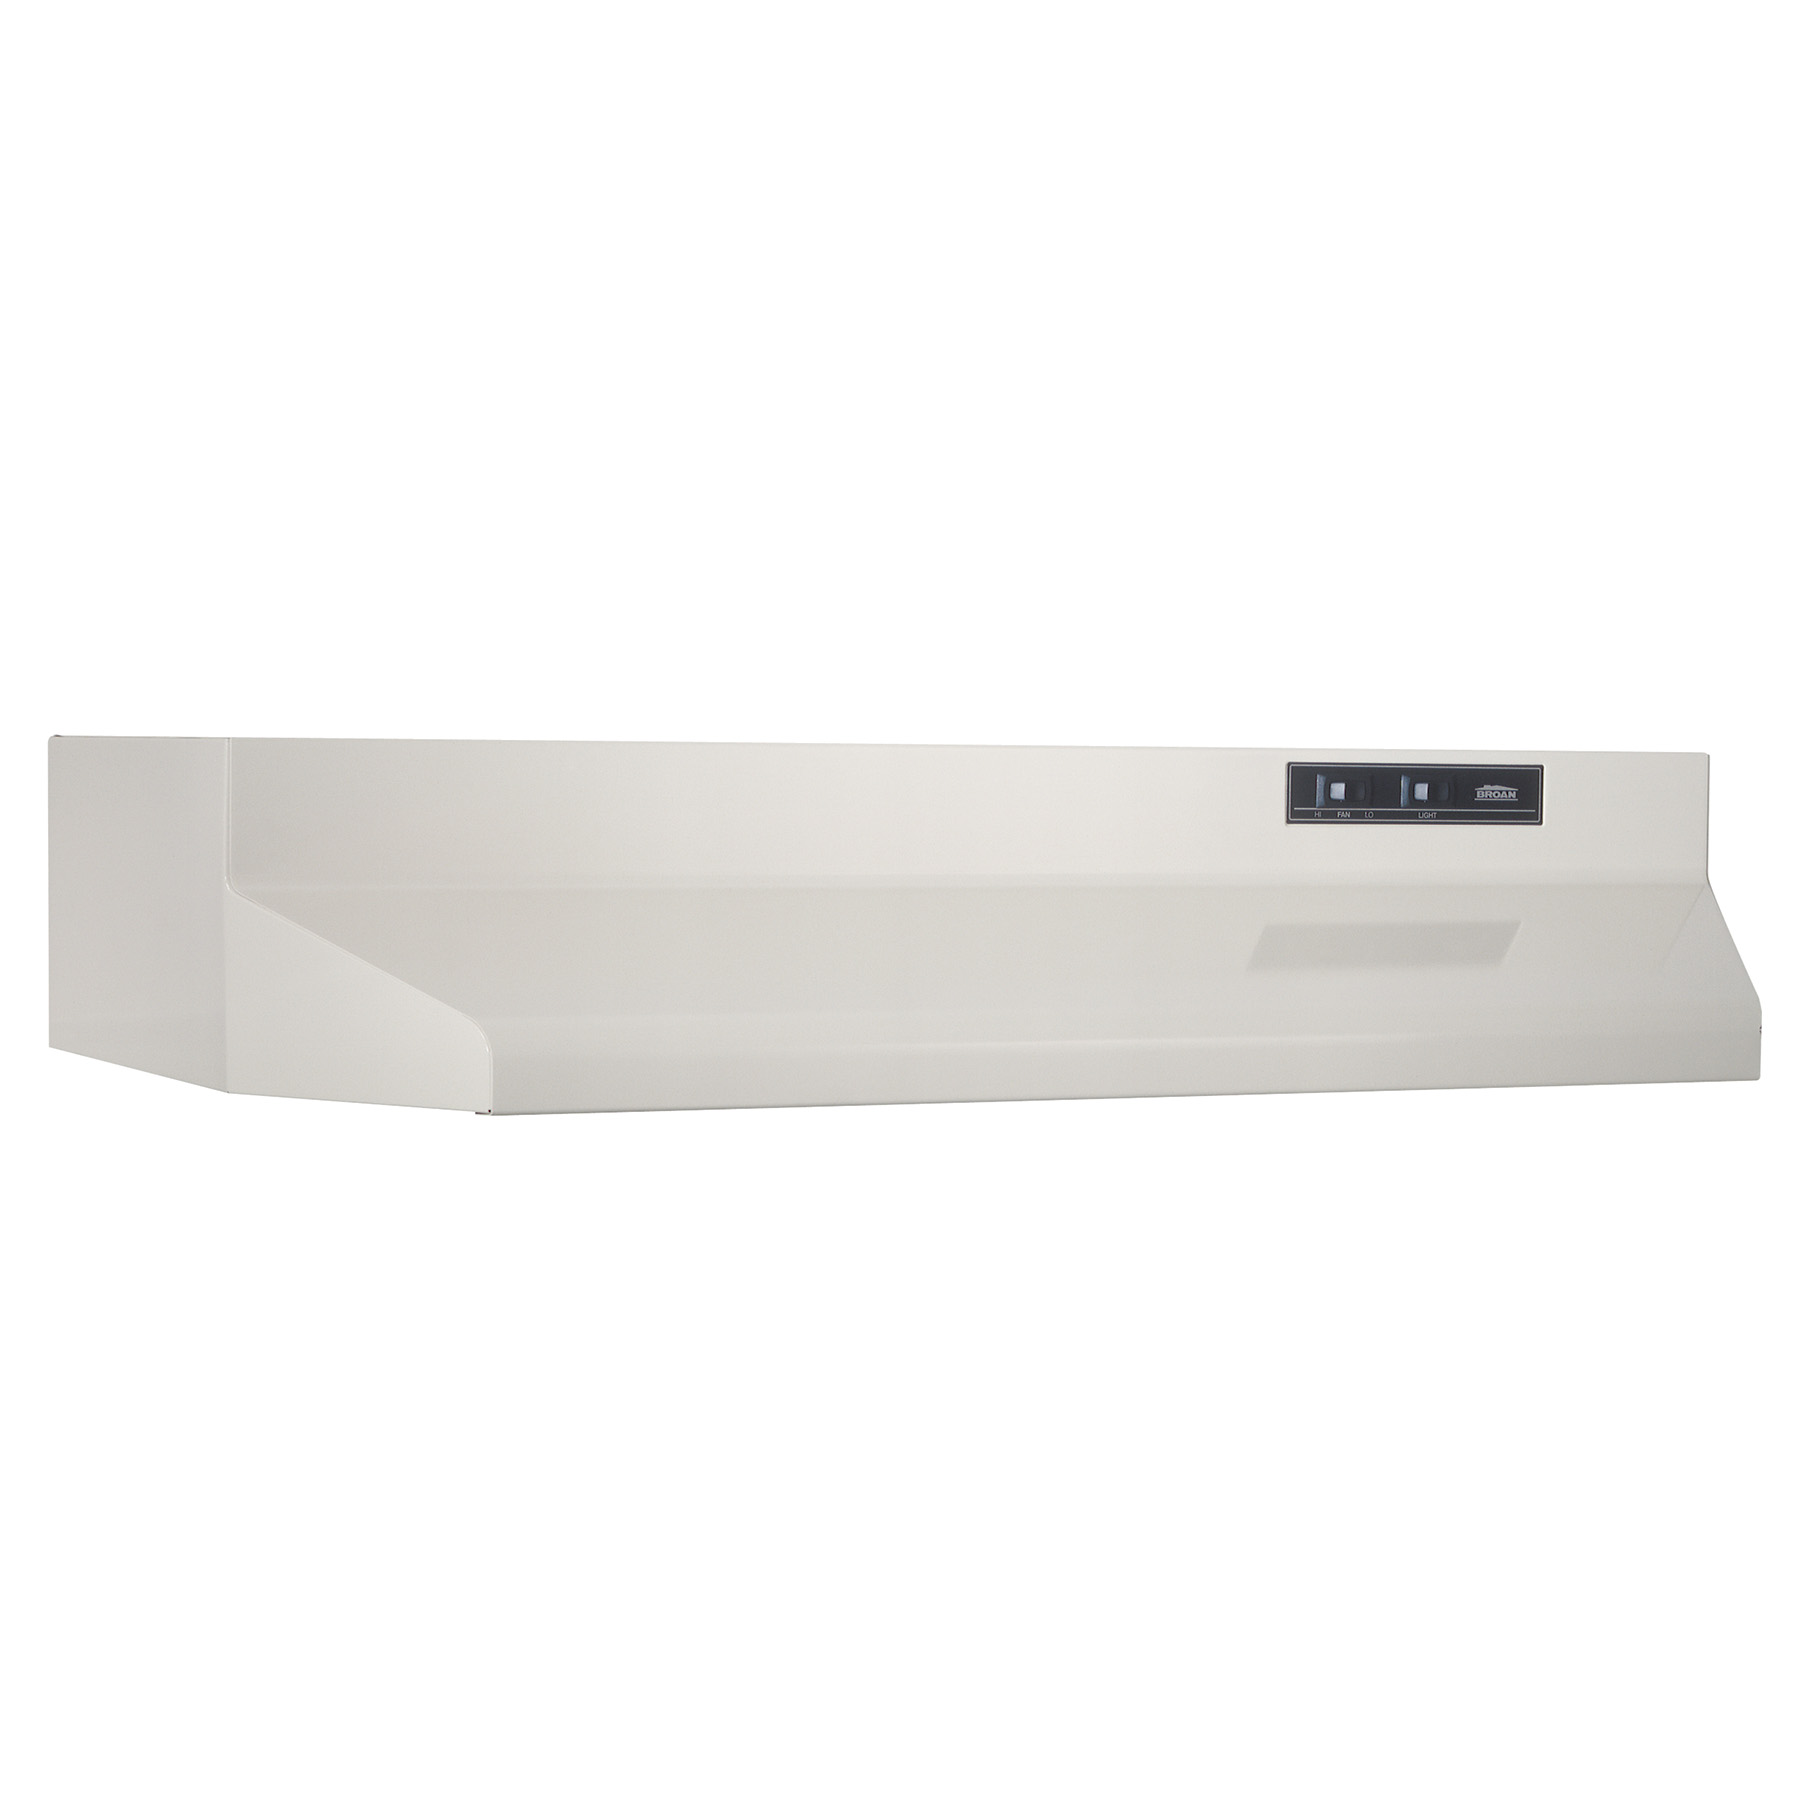 **DISCONTINUED** Broan® 30-Inch Ducted Under-Cabinet Range Hood, 210 MAX Blower CFM, Bisque